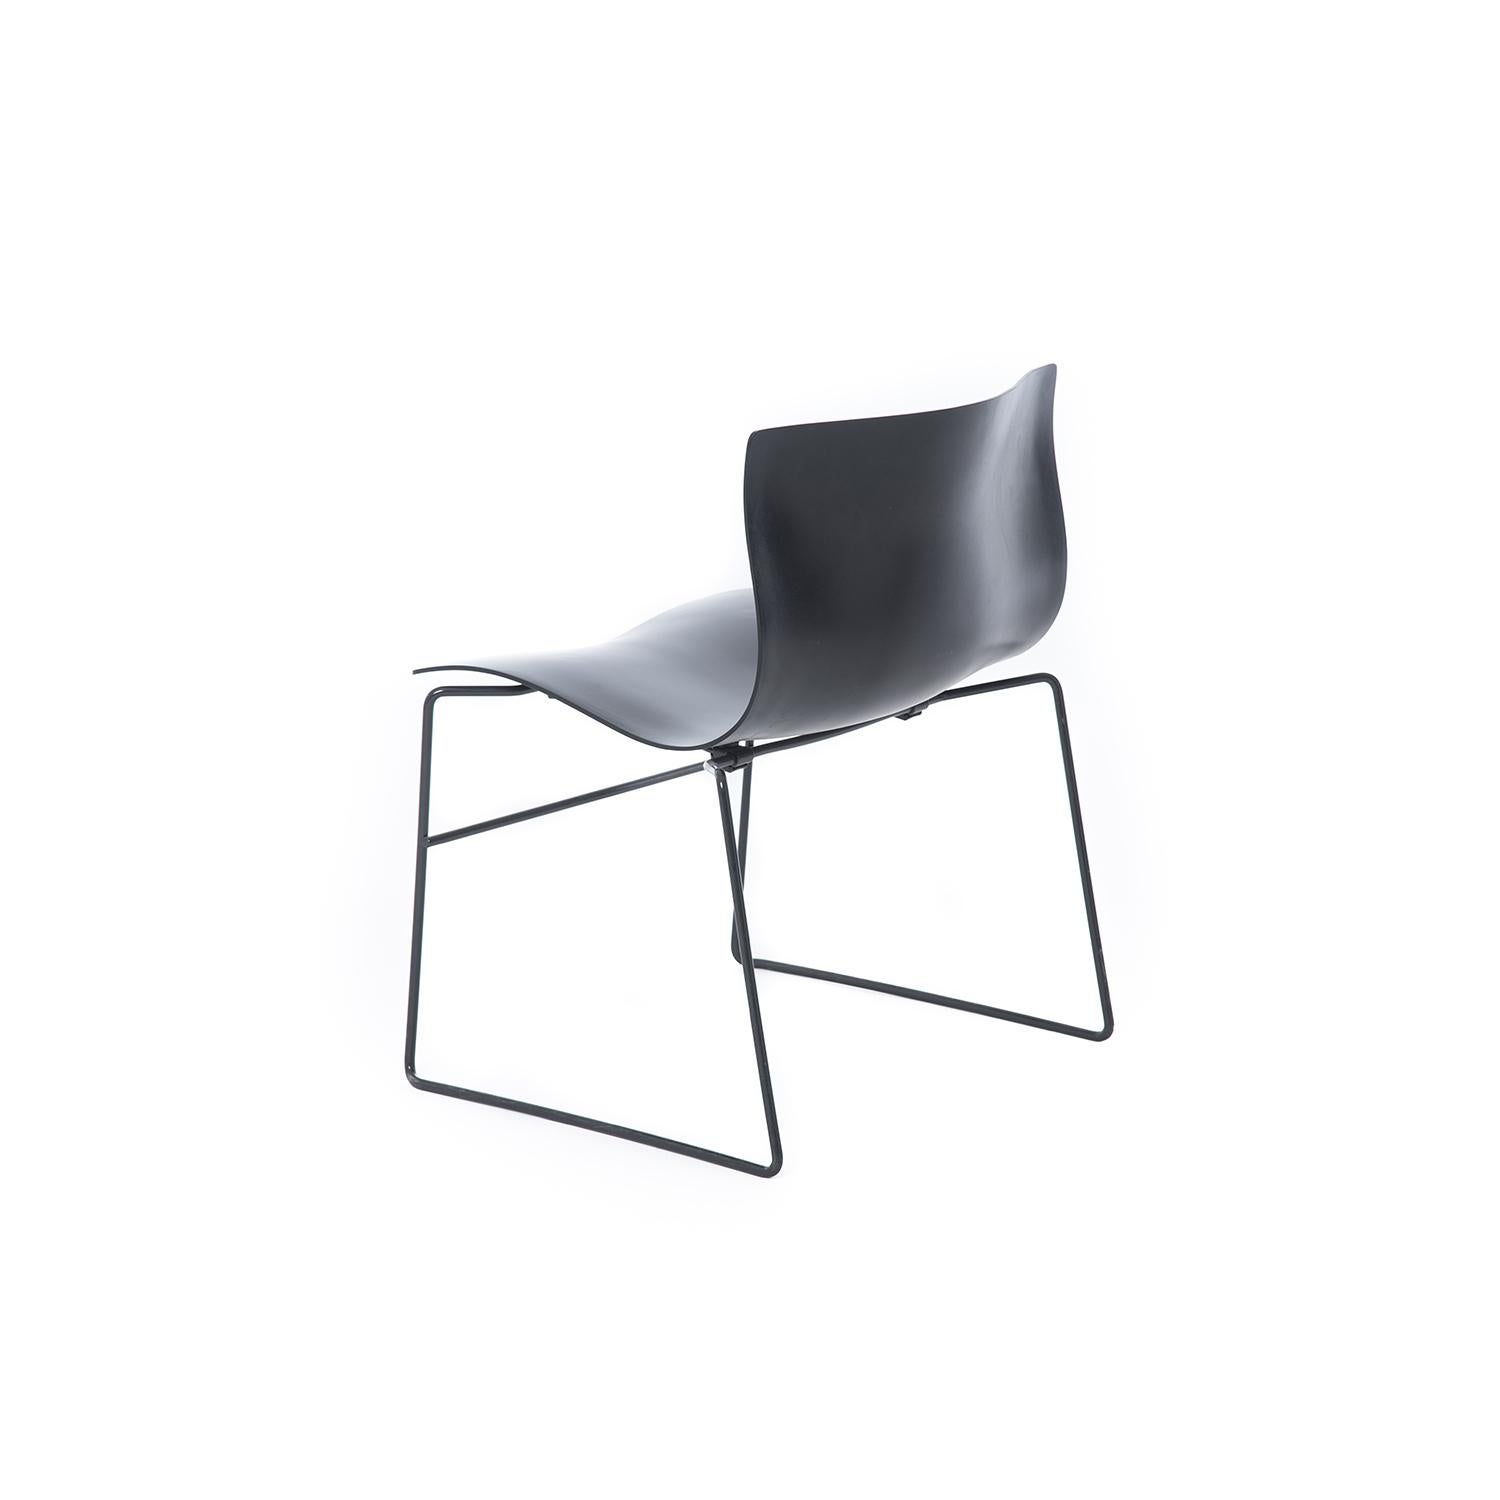 A durable, wide chair with an undulating seat and back.